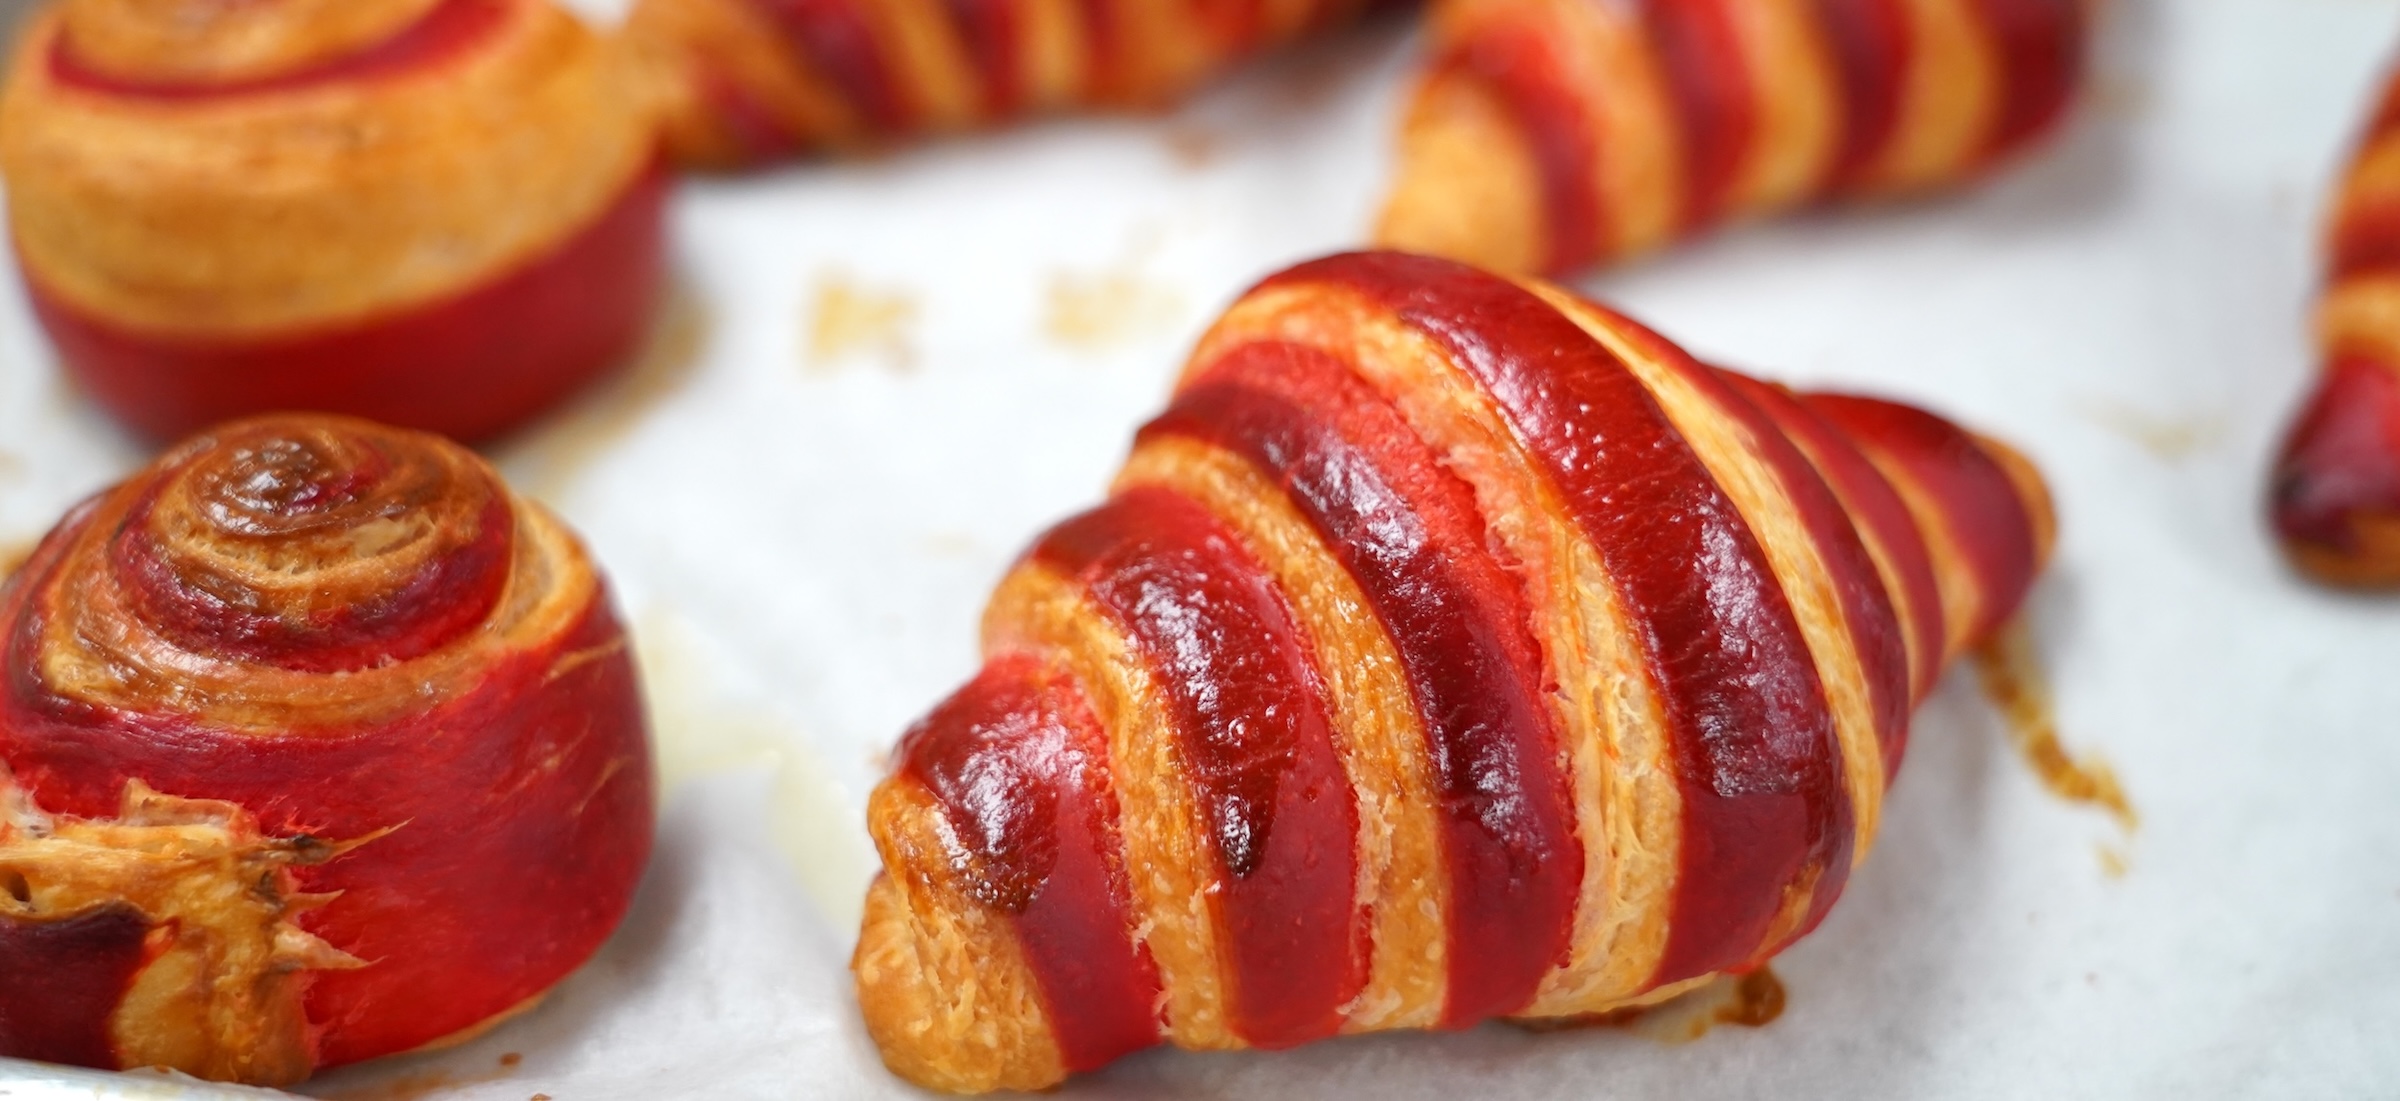 Red and golden brown striped croissants sit on a parchment paper lined sheet tray